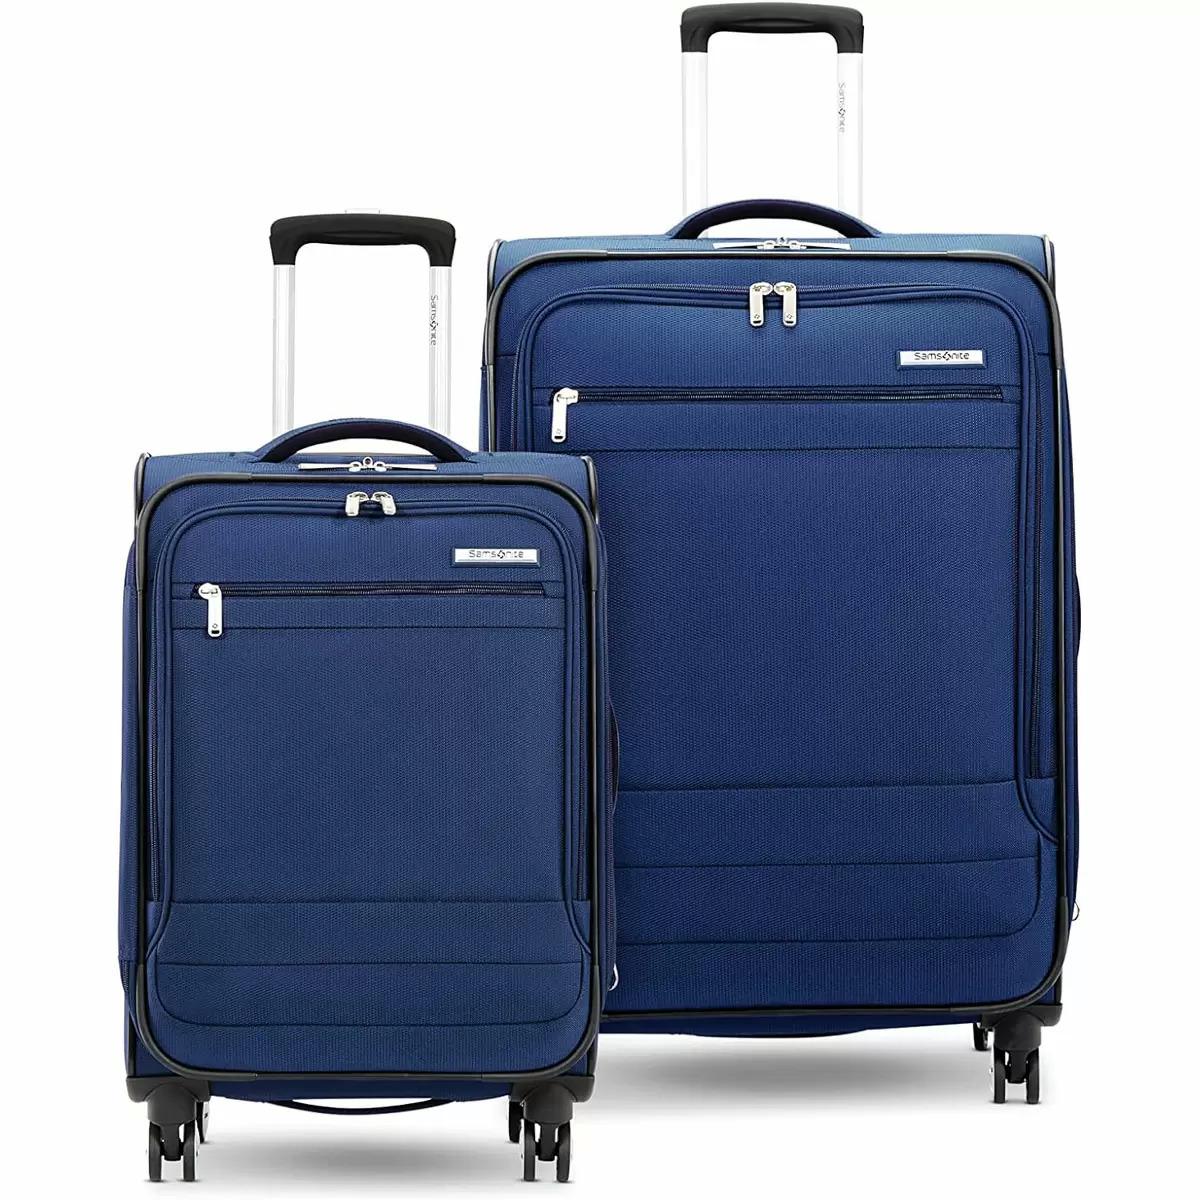 Samsonite Aspire DLX Softside Expandable Luggage and Spinner for $129.99 Shipped